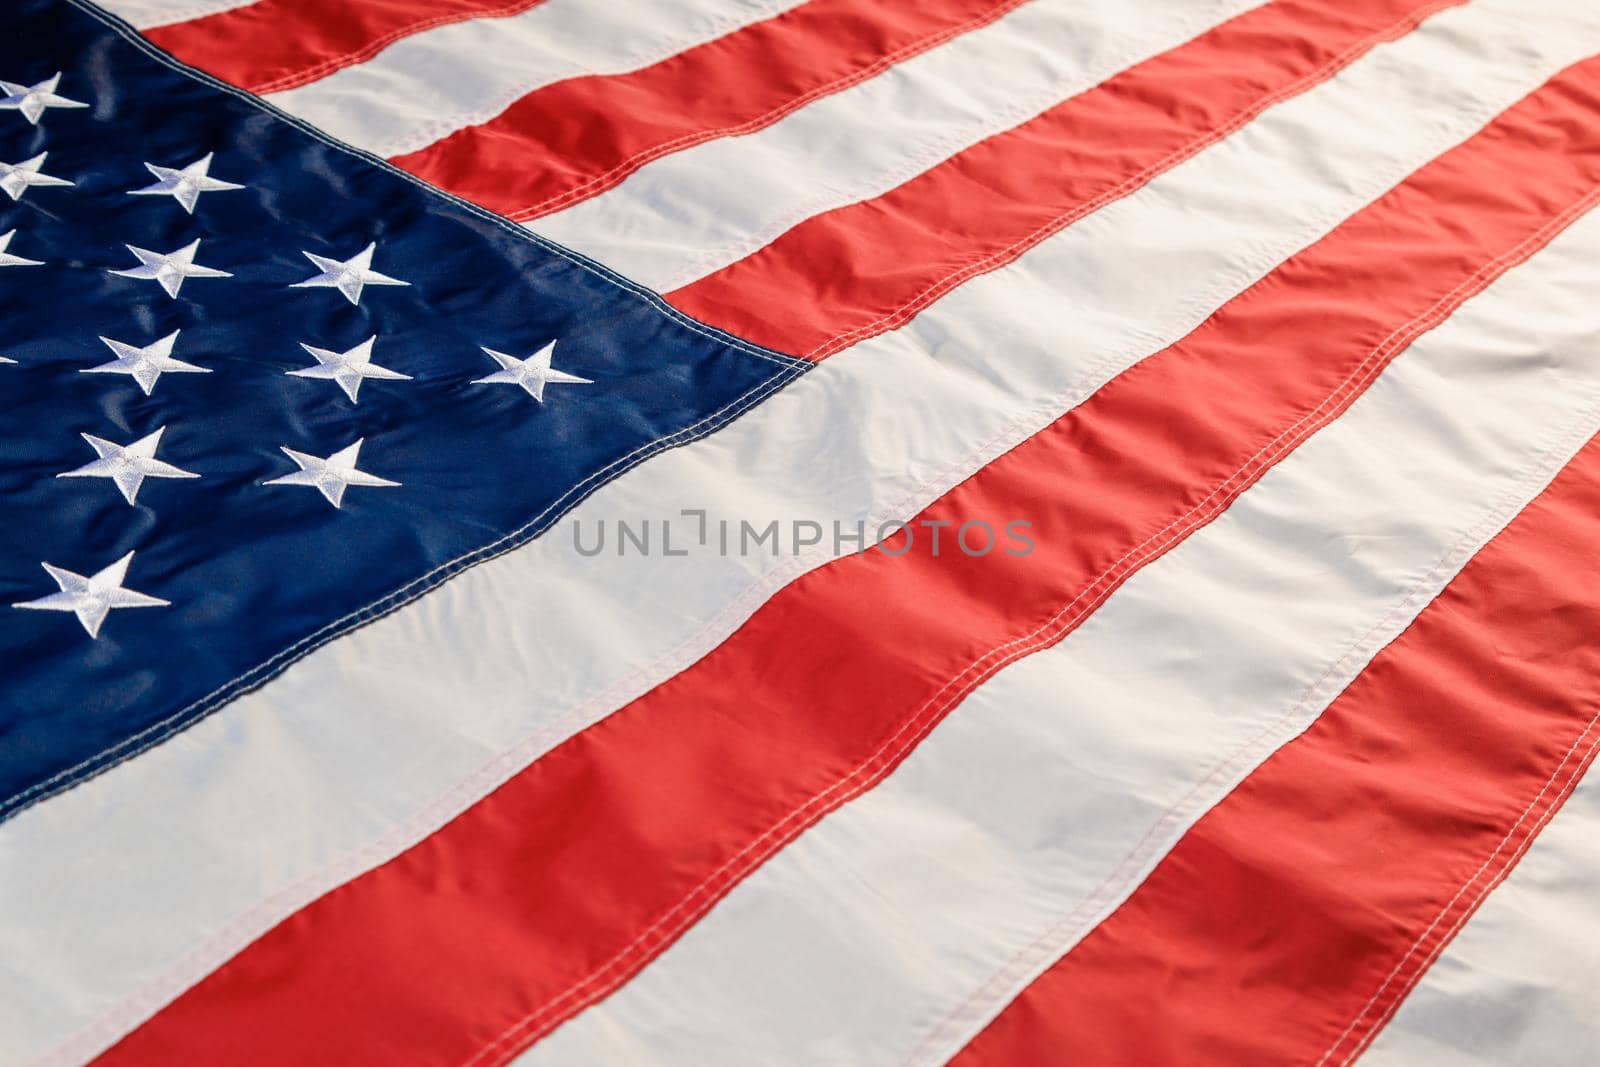 full-frame background of nylon sewed and embroided United States national flag - wide angle diagonal view